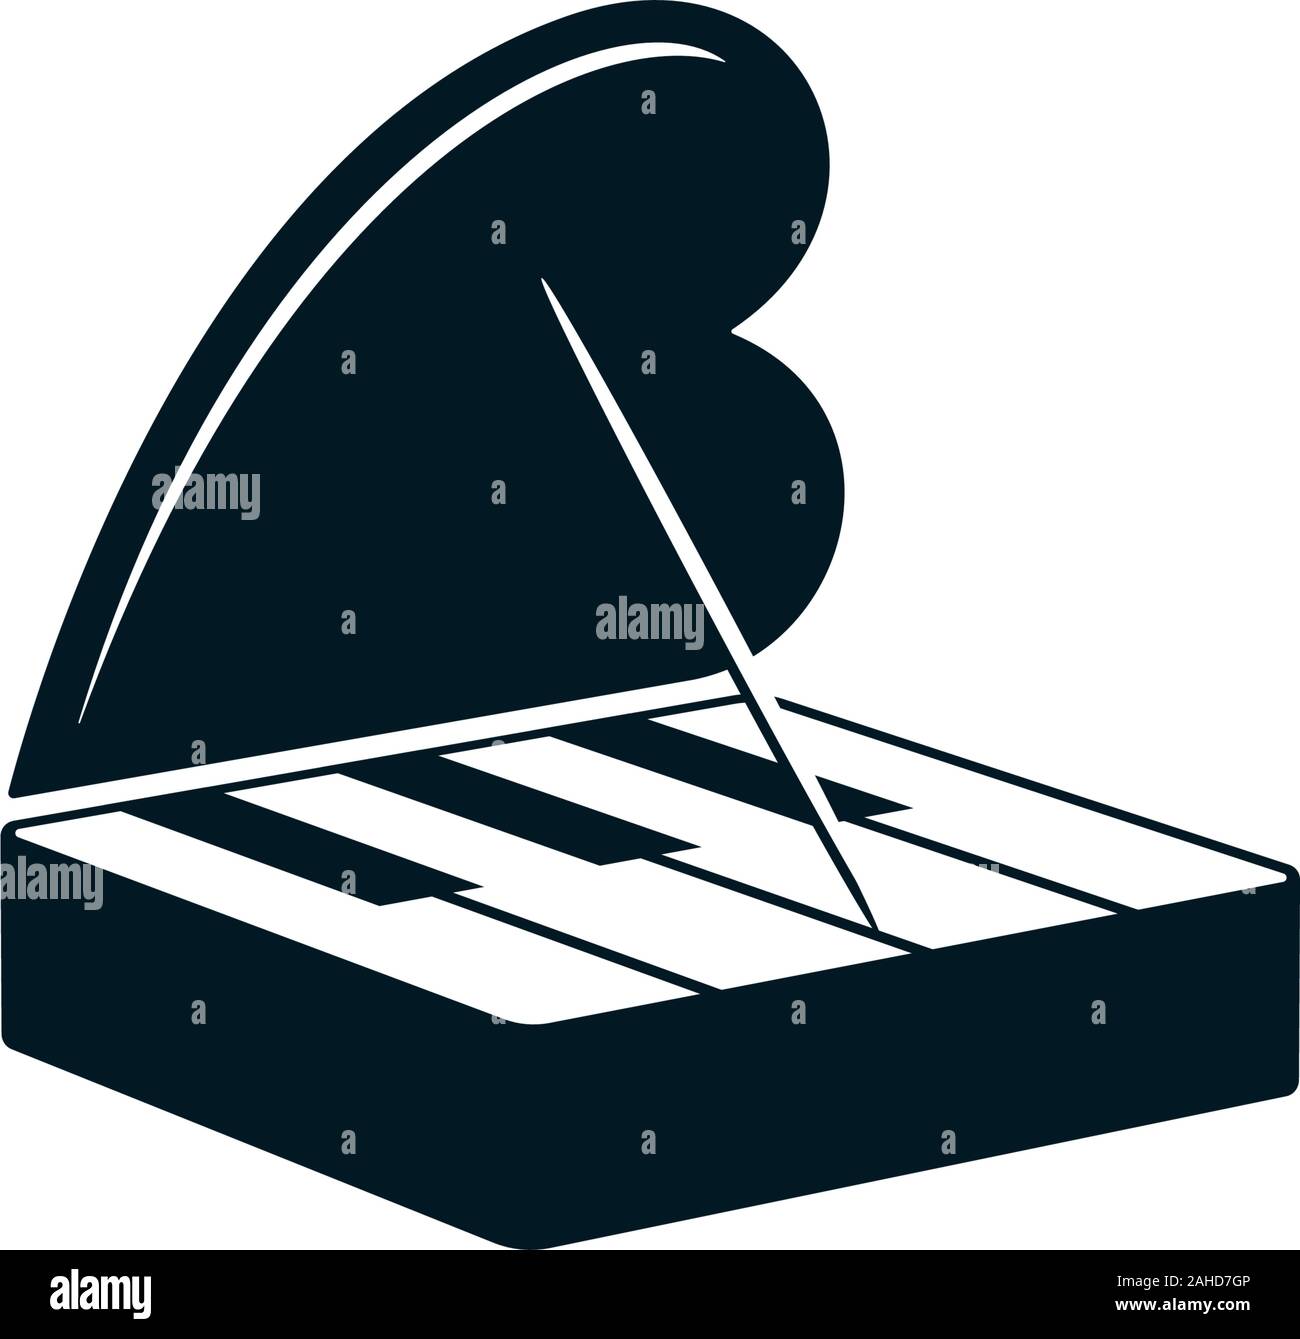 Piano symbol with heart shaped cover. Musical instrument and love concept design. Stock Vector